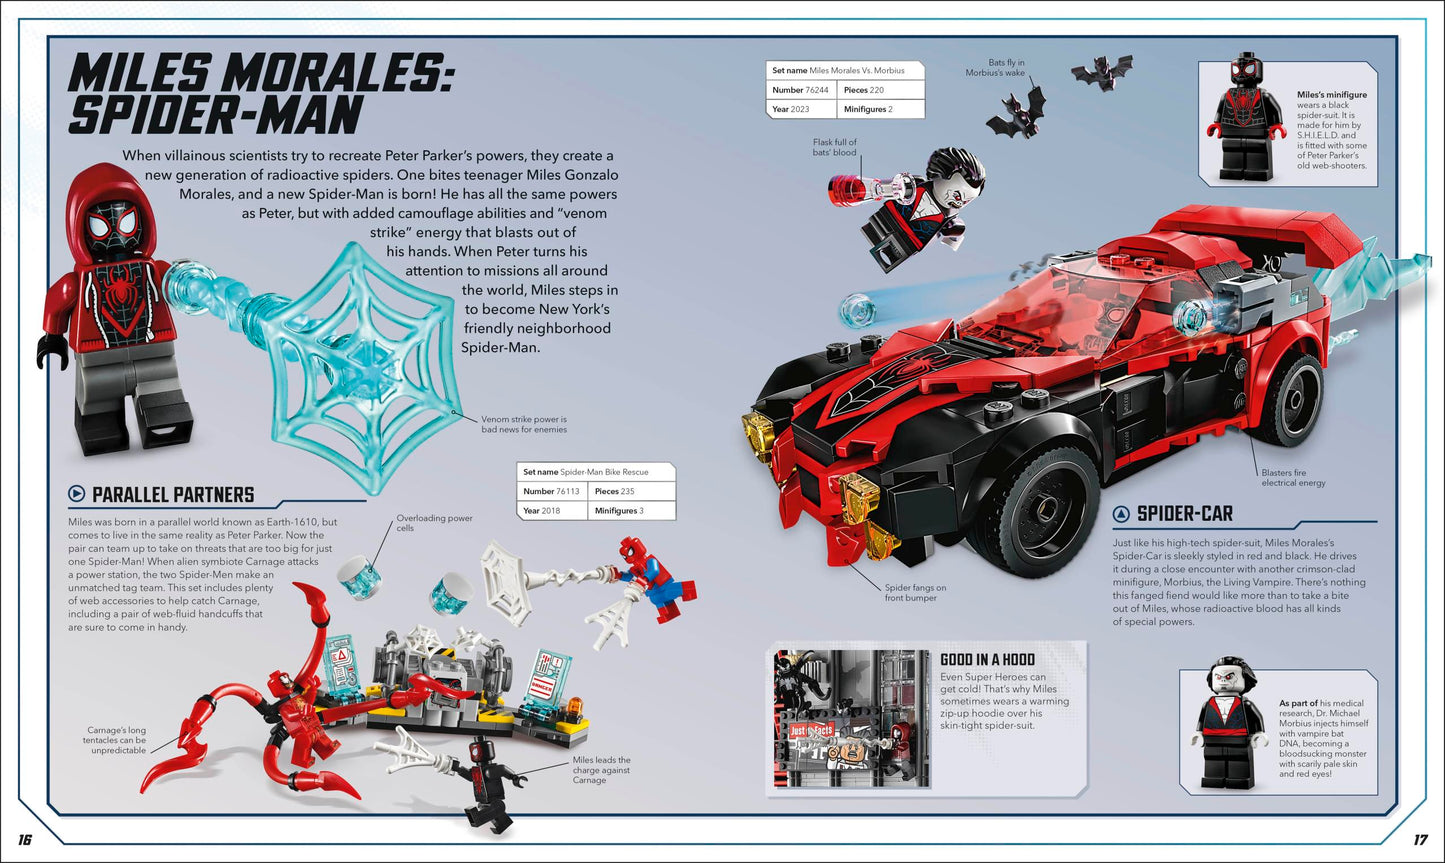 Lego Marvel Visual Dictionary with Exclusive Iron Man Minifigure